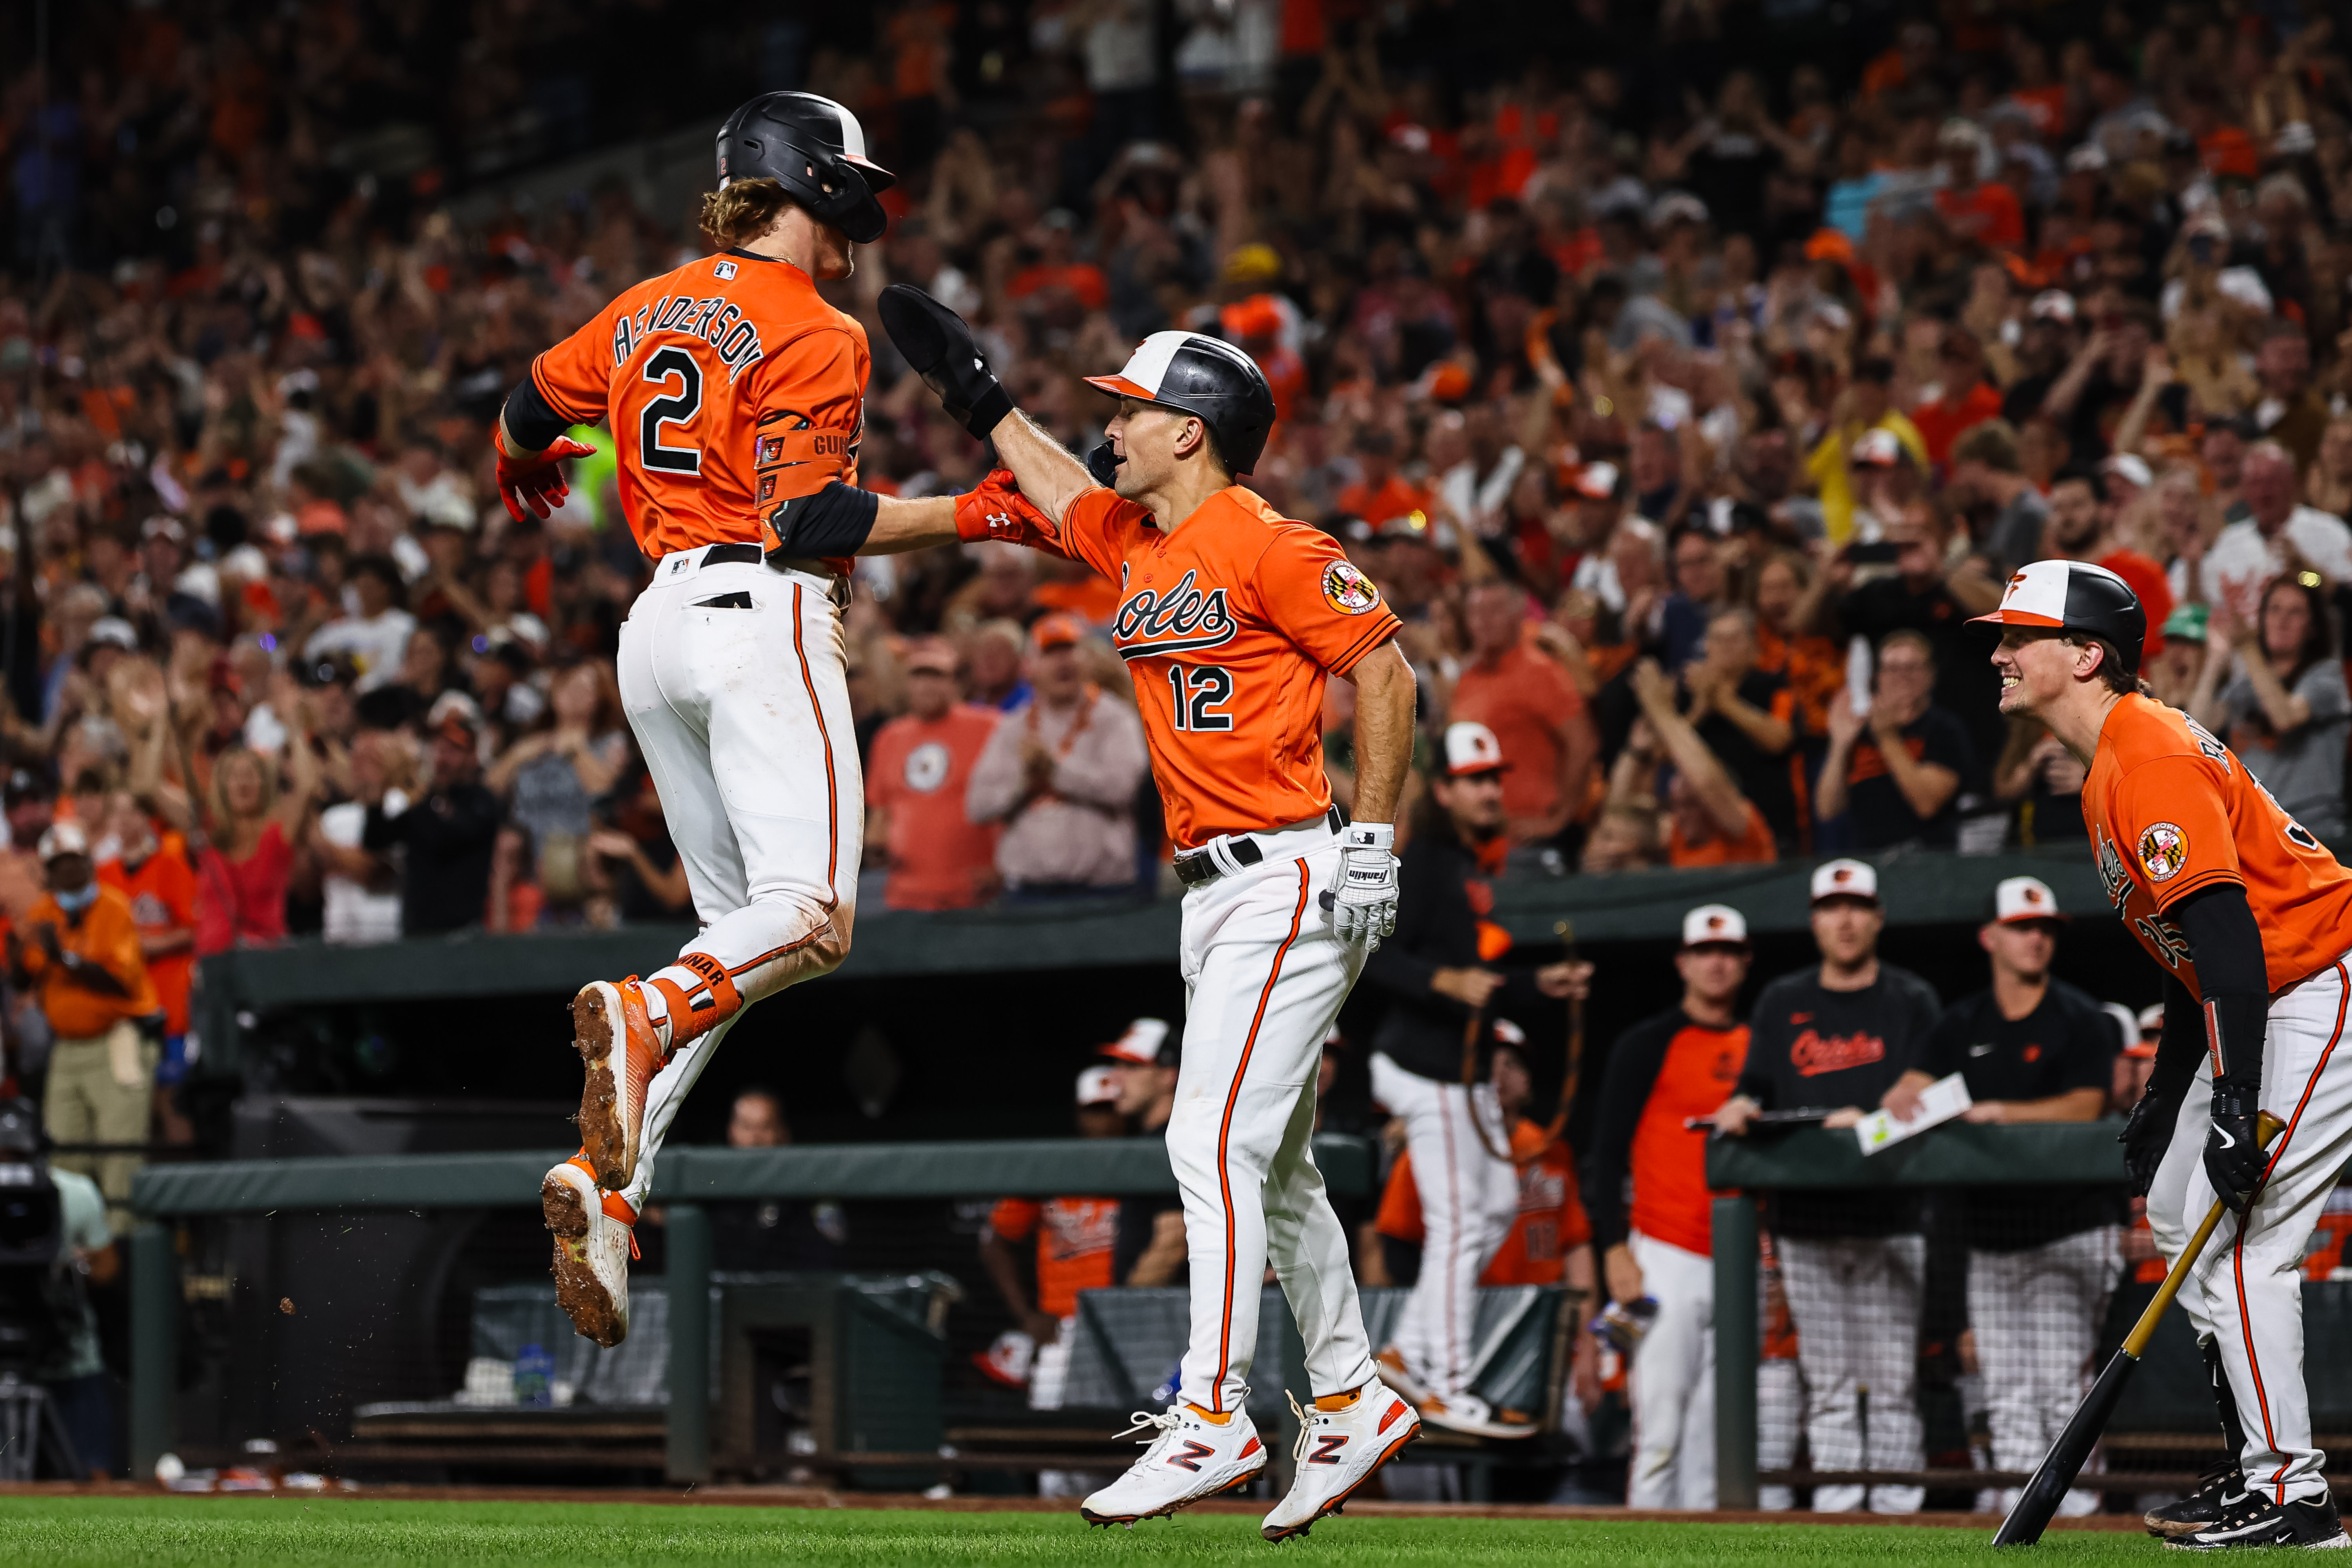 Orioles beat Rays 5-4 in 11-inning thriller after both teams